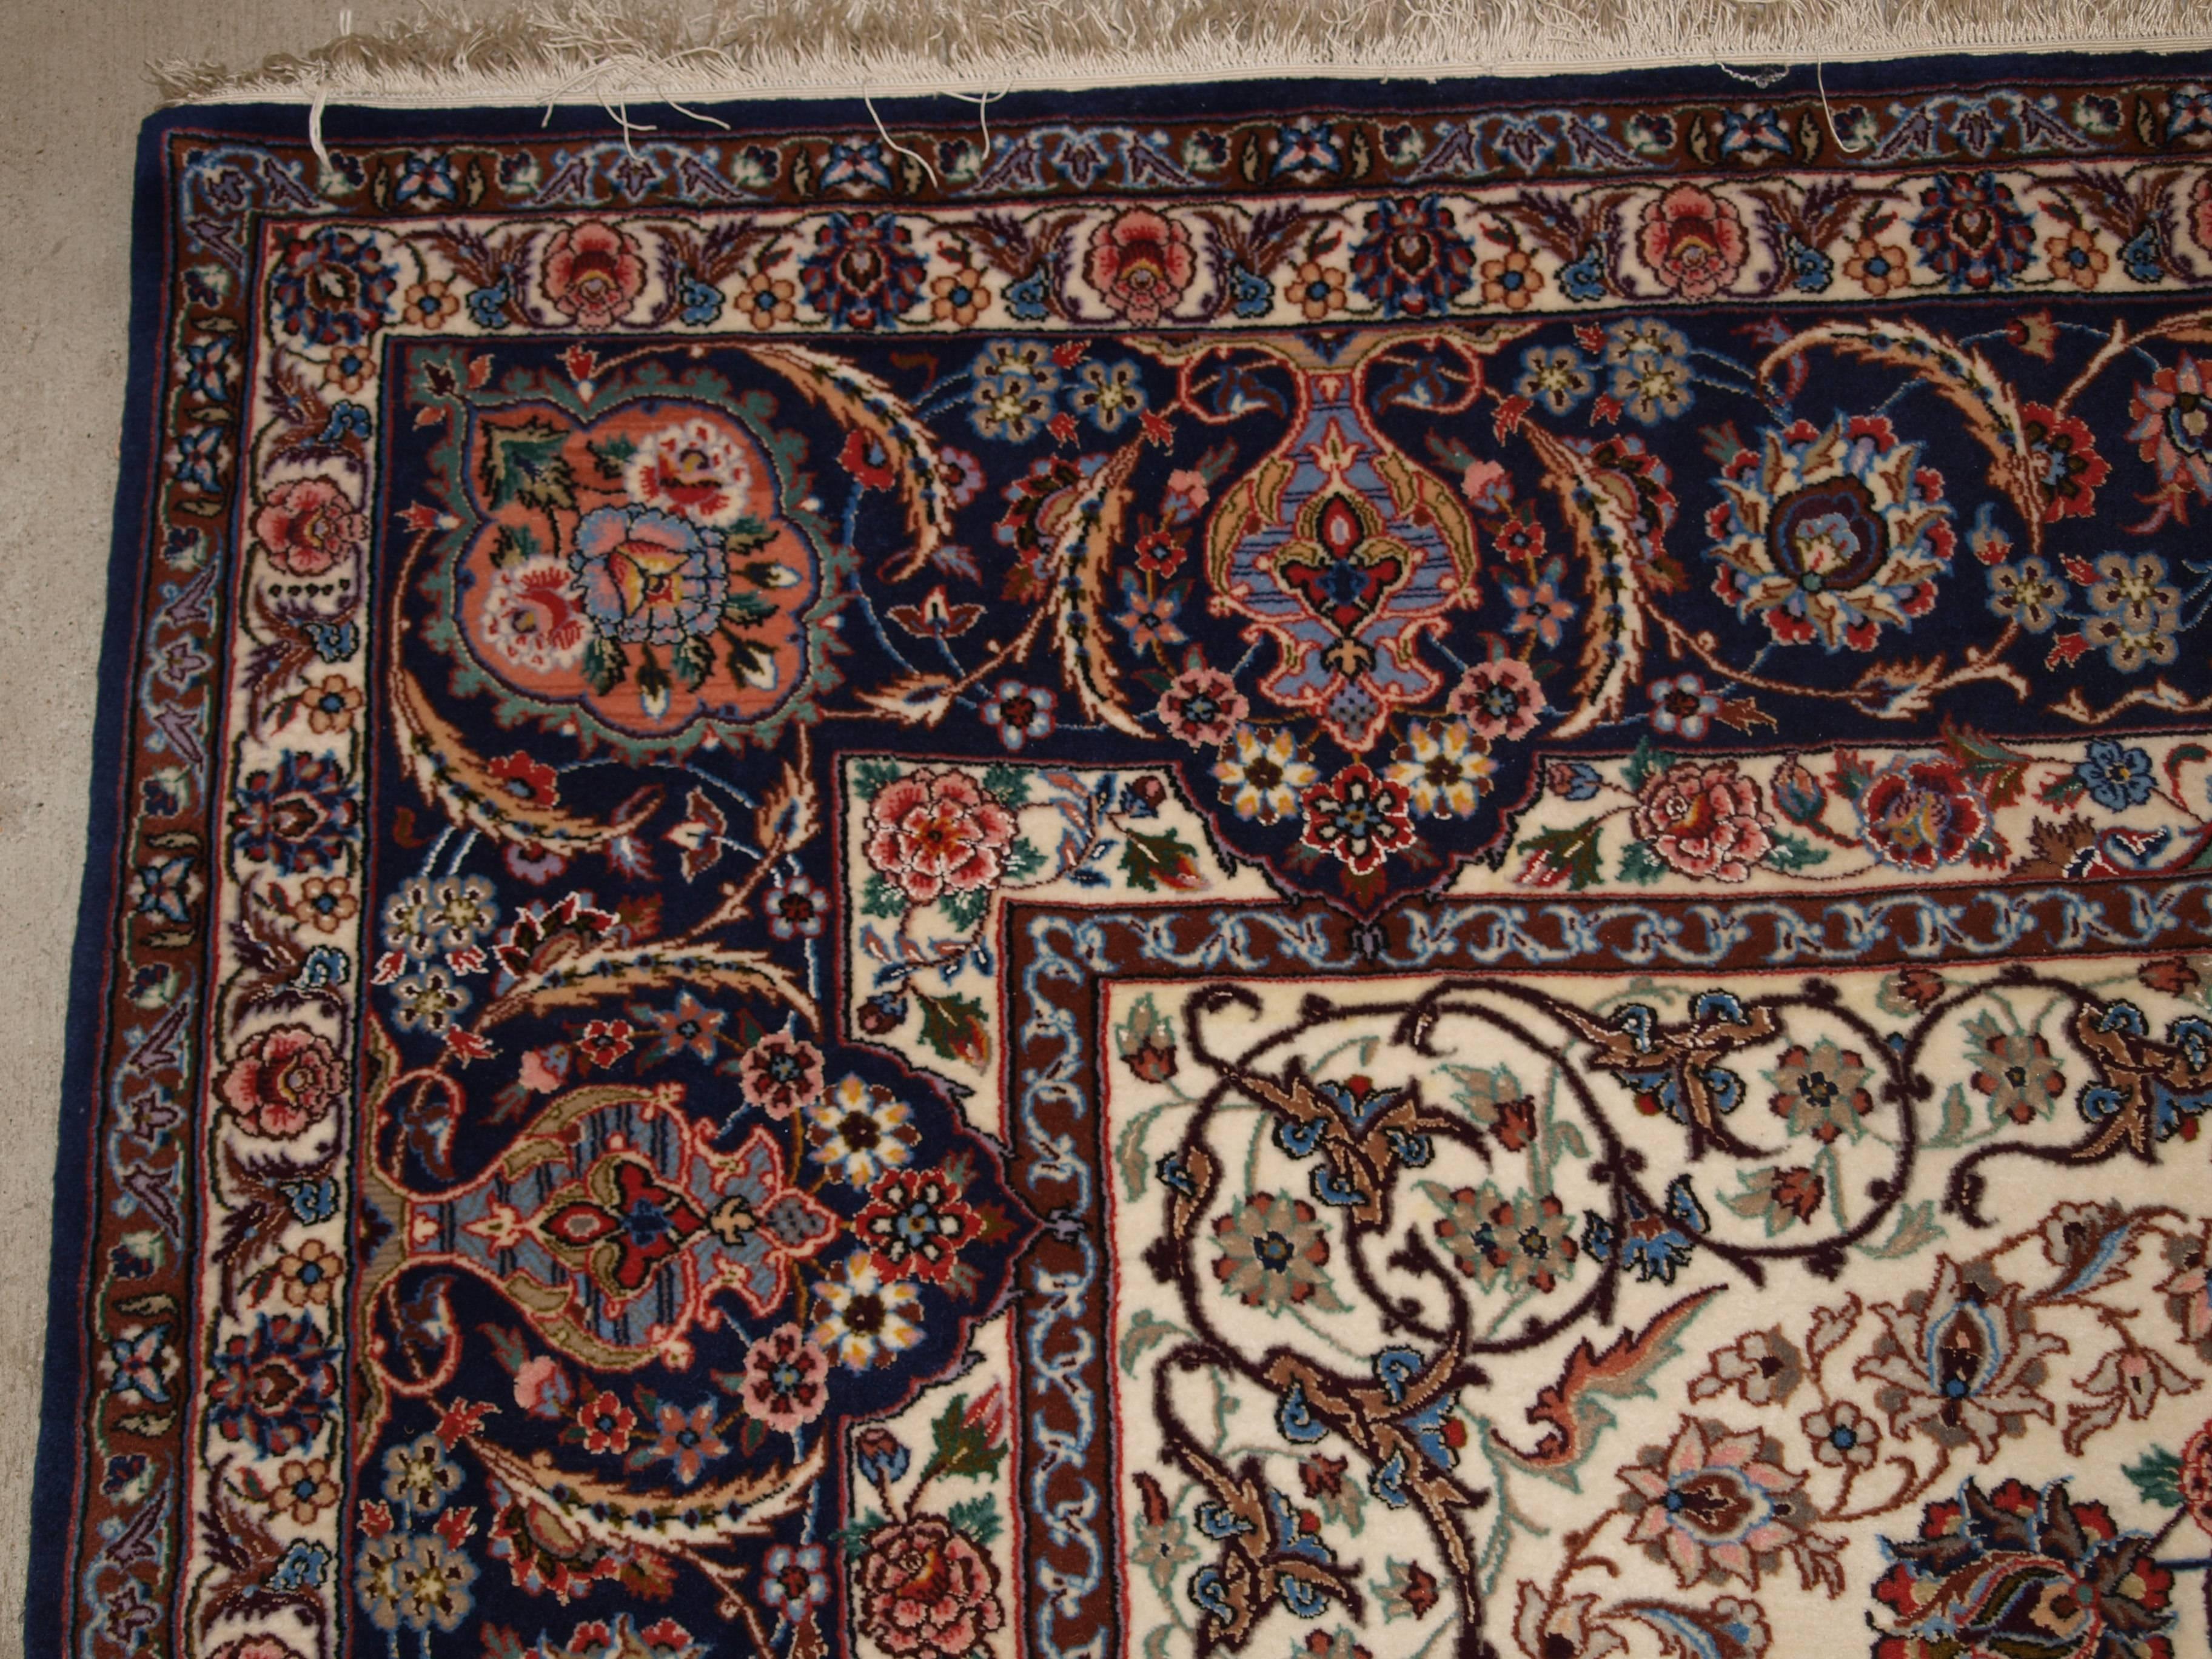 Size:10ft 6in x 6ft 7in (320 x 200cm).

Old Persian Isfahan carpet, wool and silk on a very fine silk foundation. 

About 40 years old.

The carpet is of very fine weave with tight fine pile of lambs wool with silk high lights. The carpet has